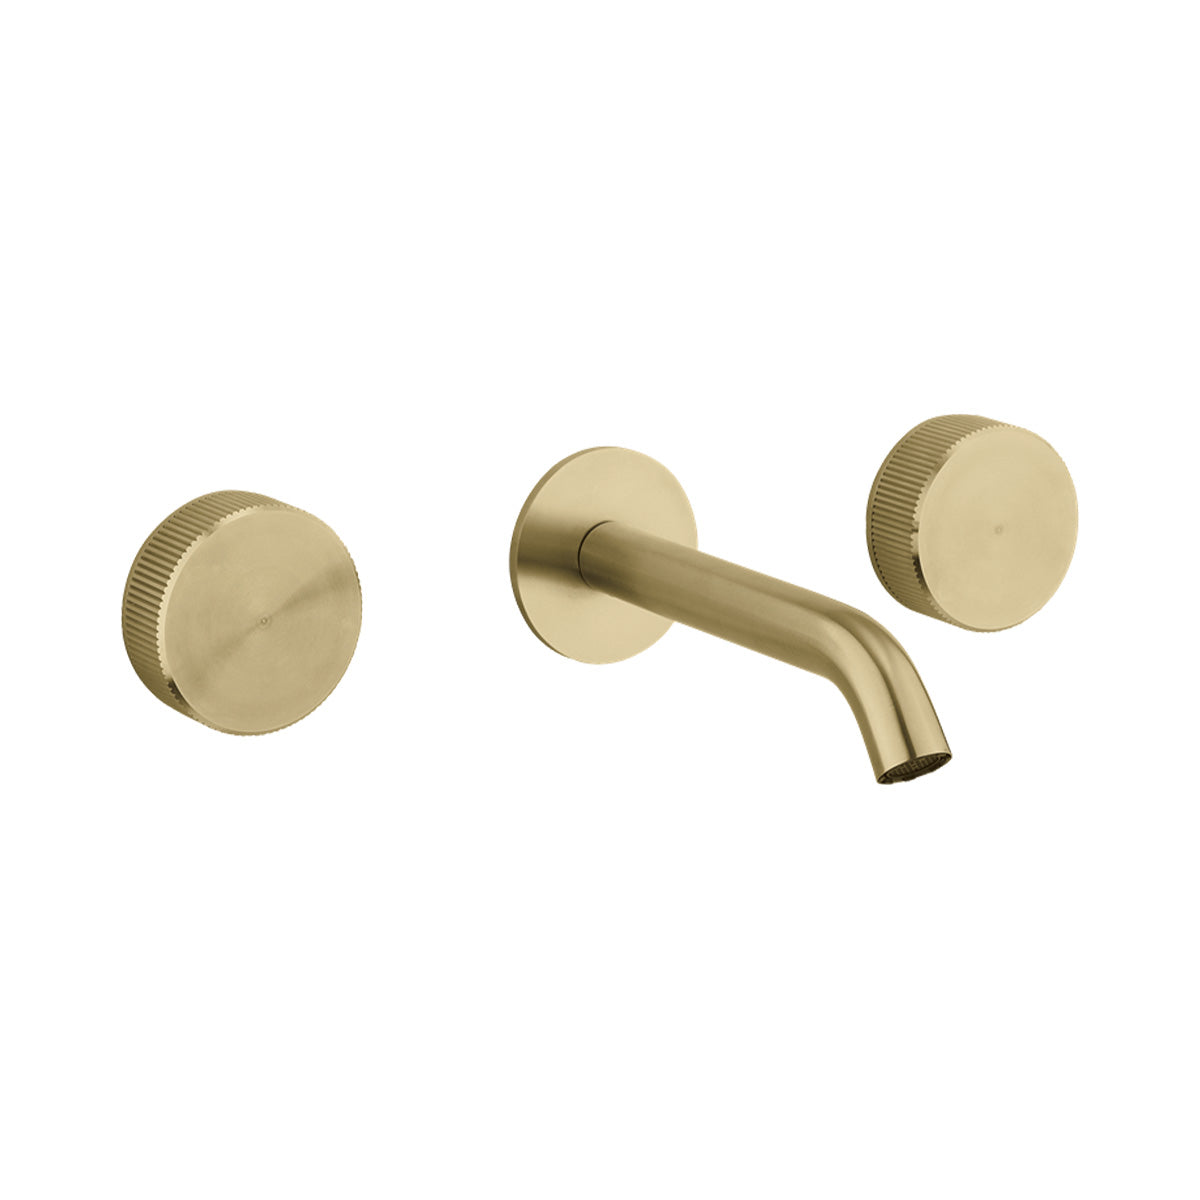 Crosswater 3ONE6 3 Hole Wall Mounted Basin Mixer Tap Brushed Brass